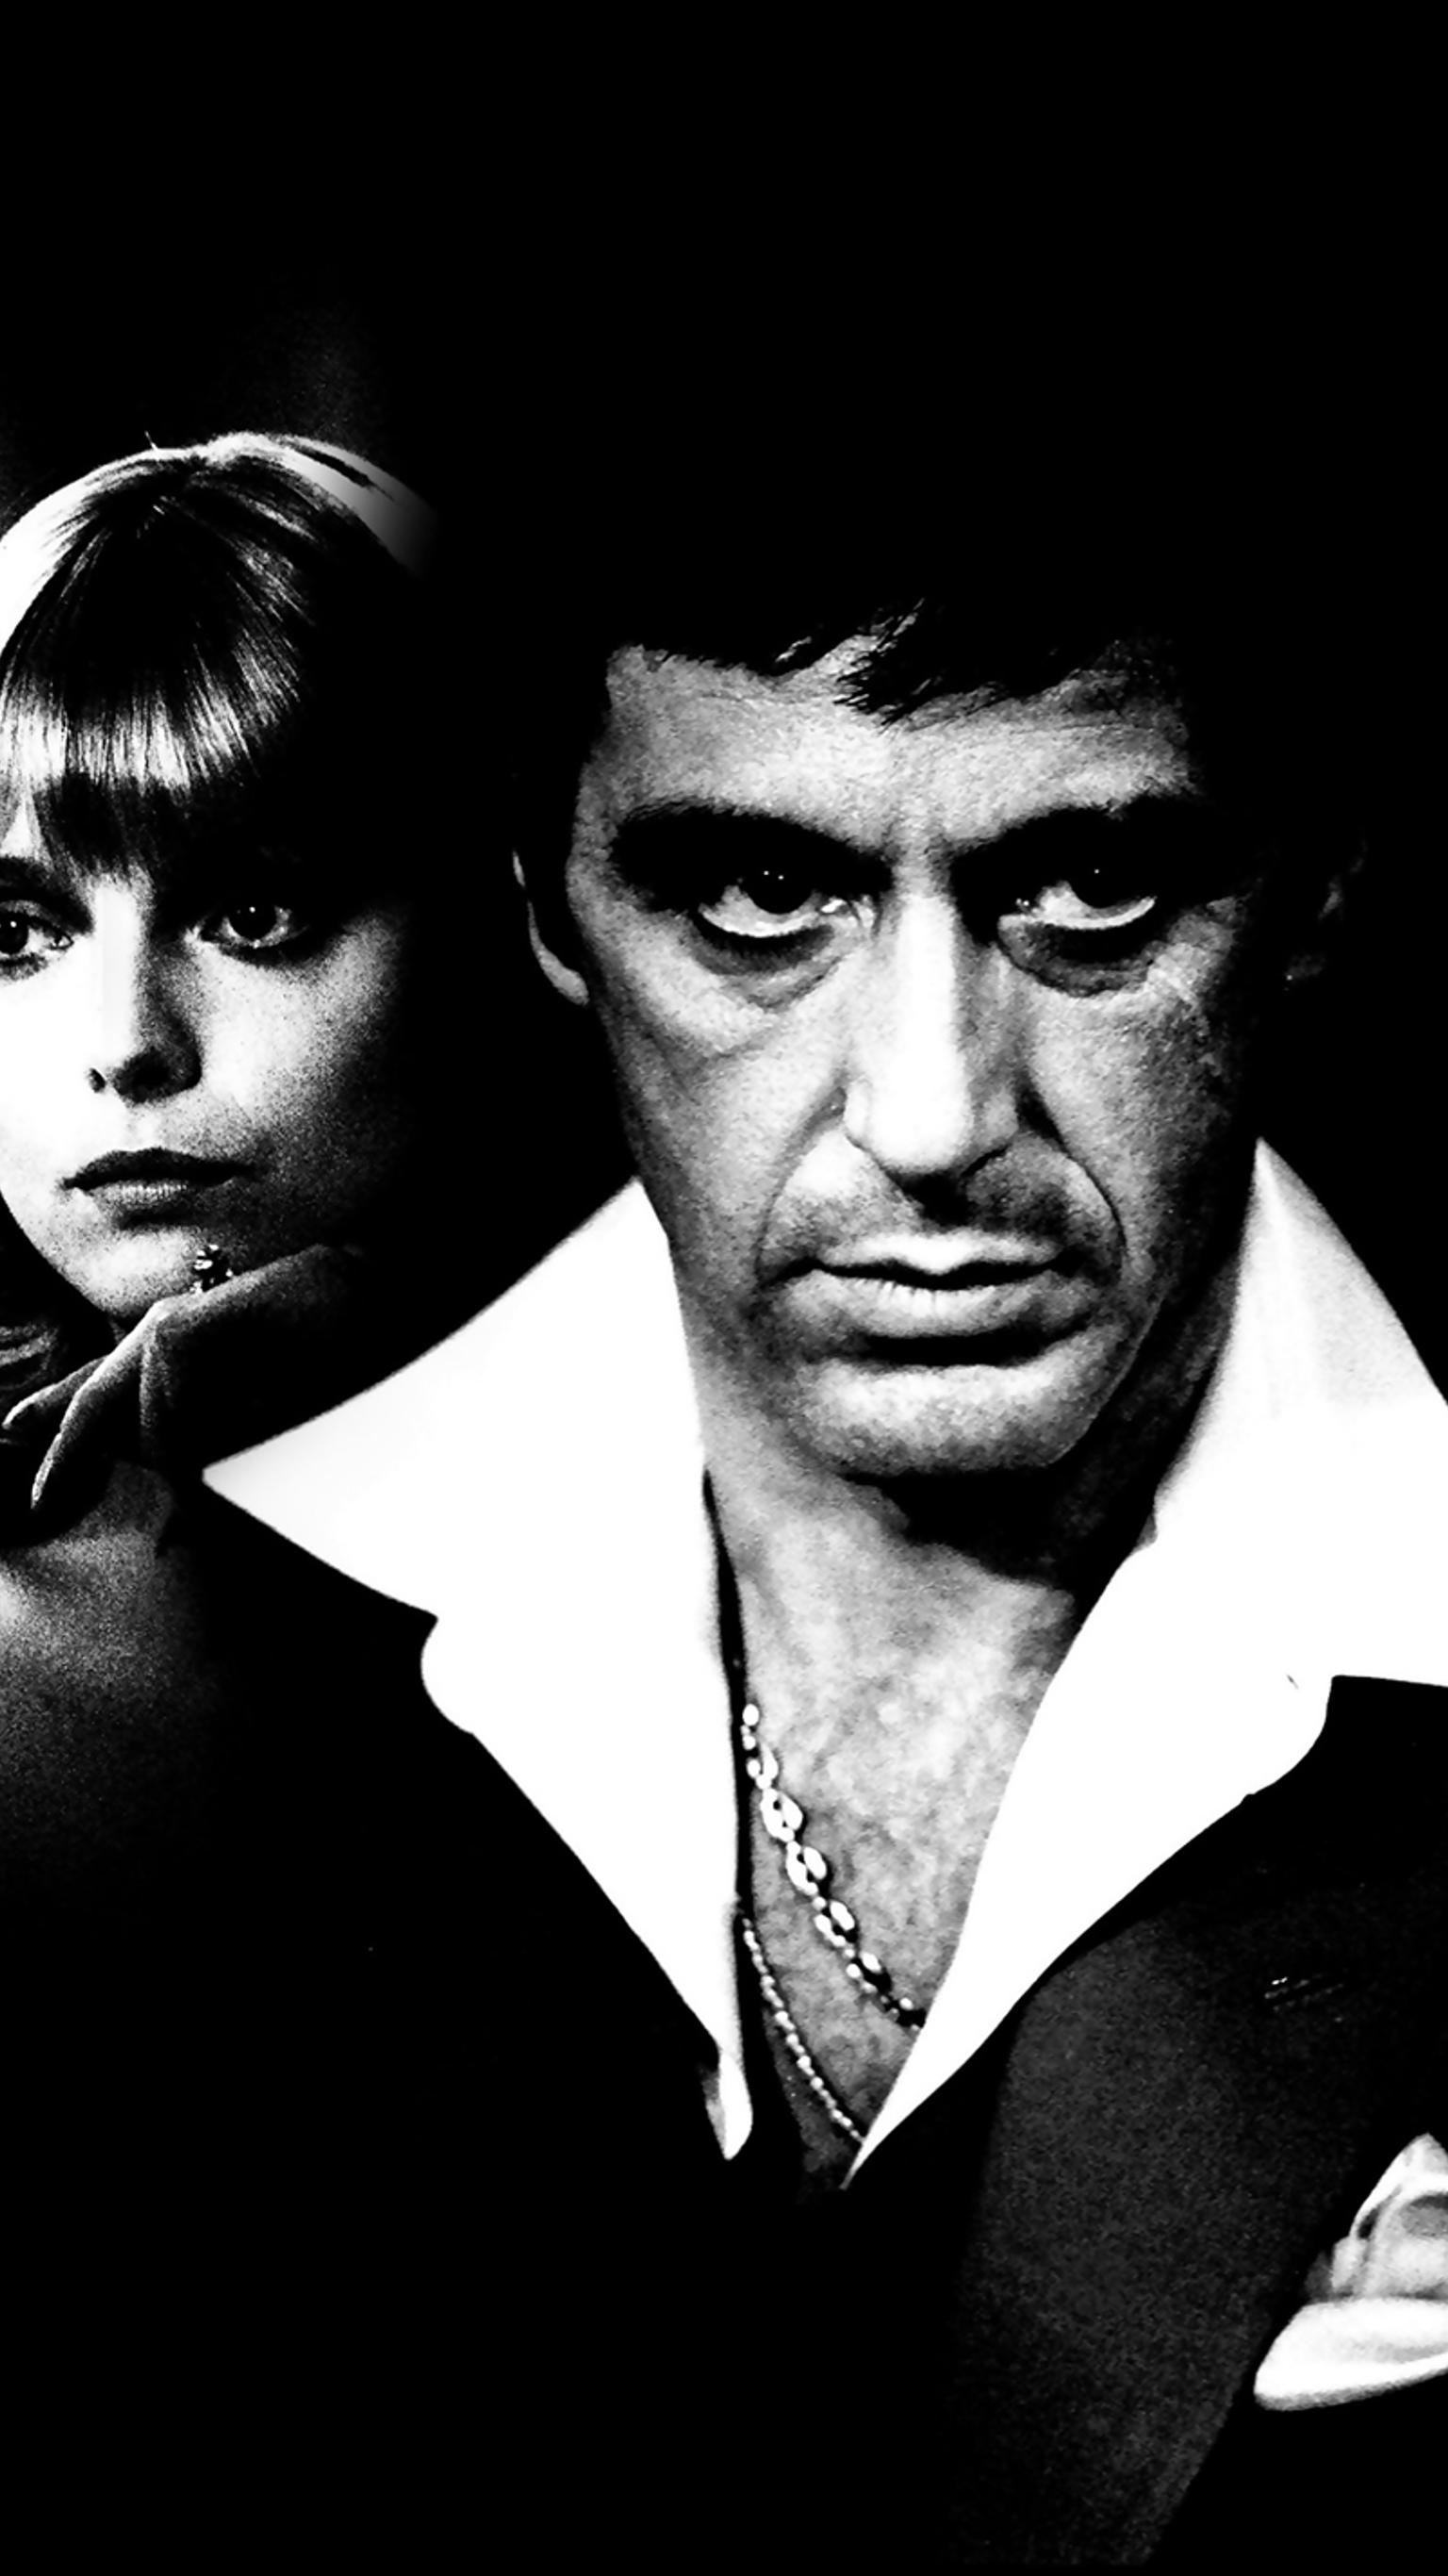 Tony Montana Wallpaper Iphone  63 Pictures  Scarface movie Al pacino  Photo print poster